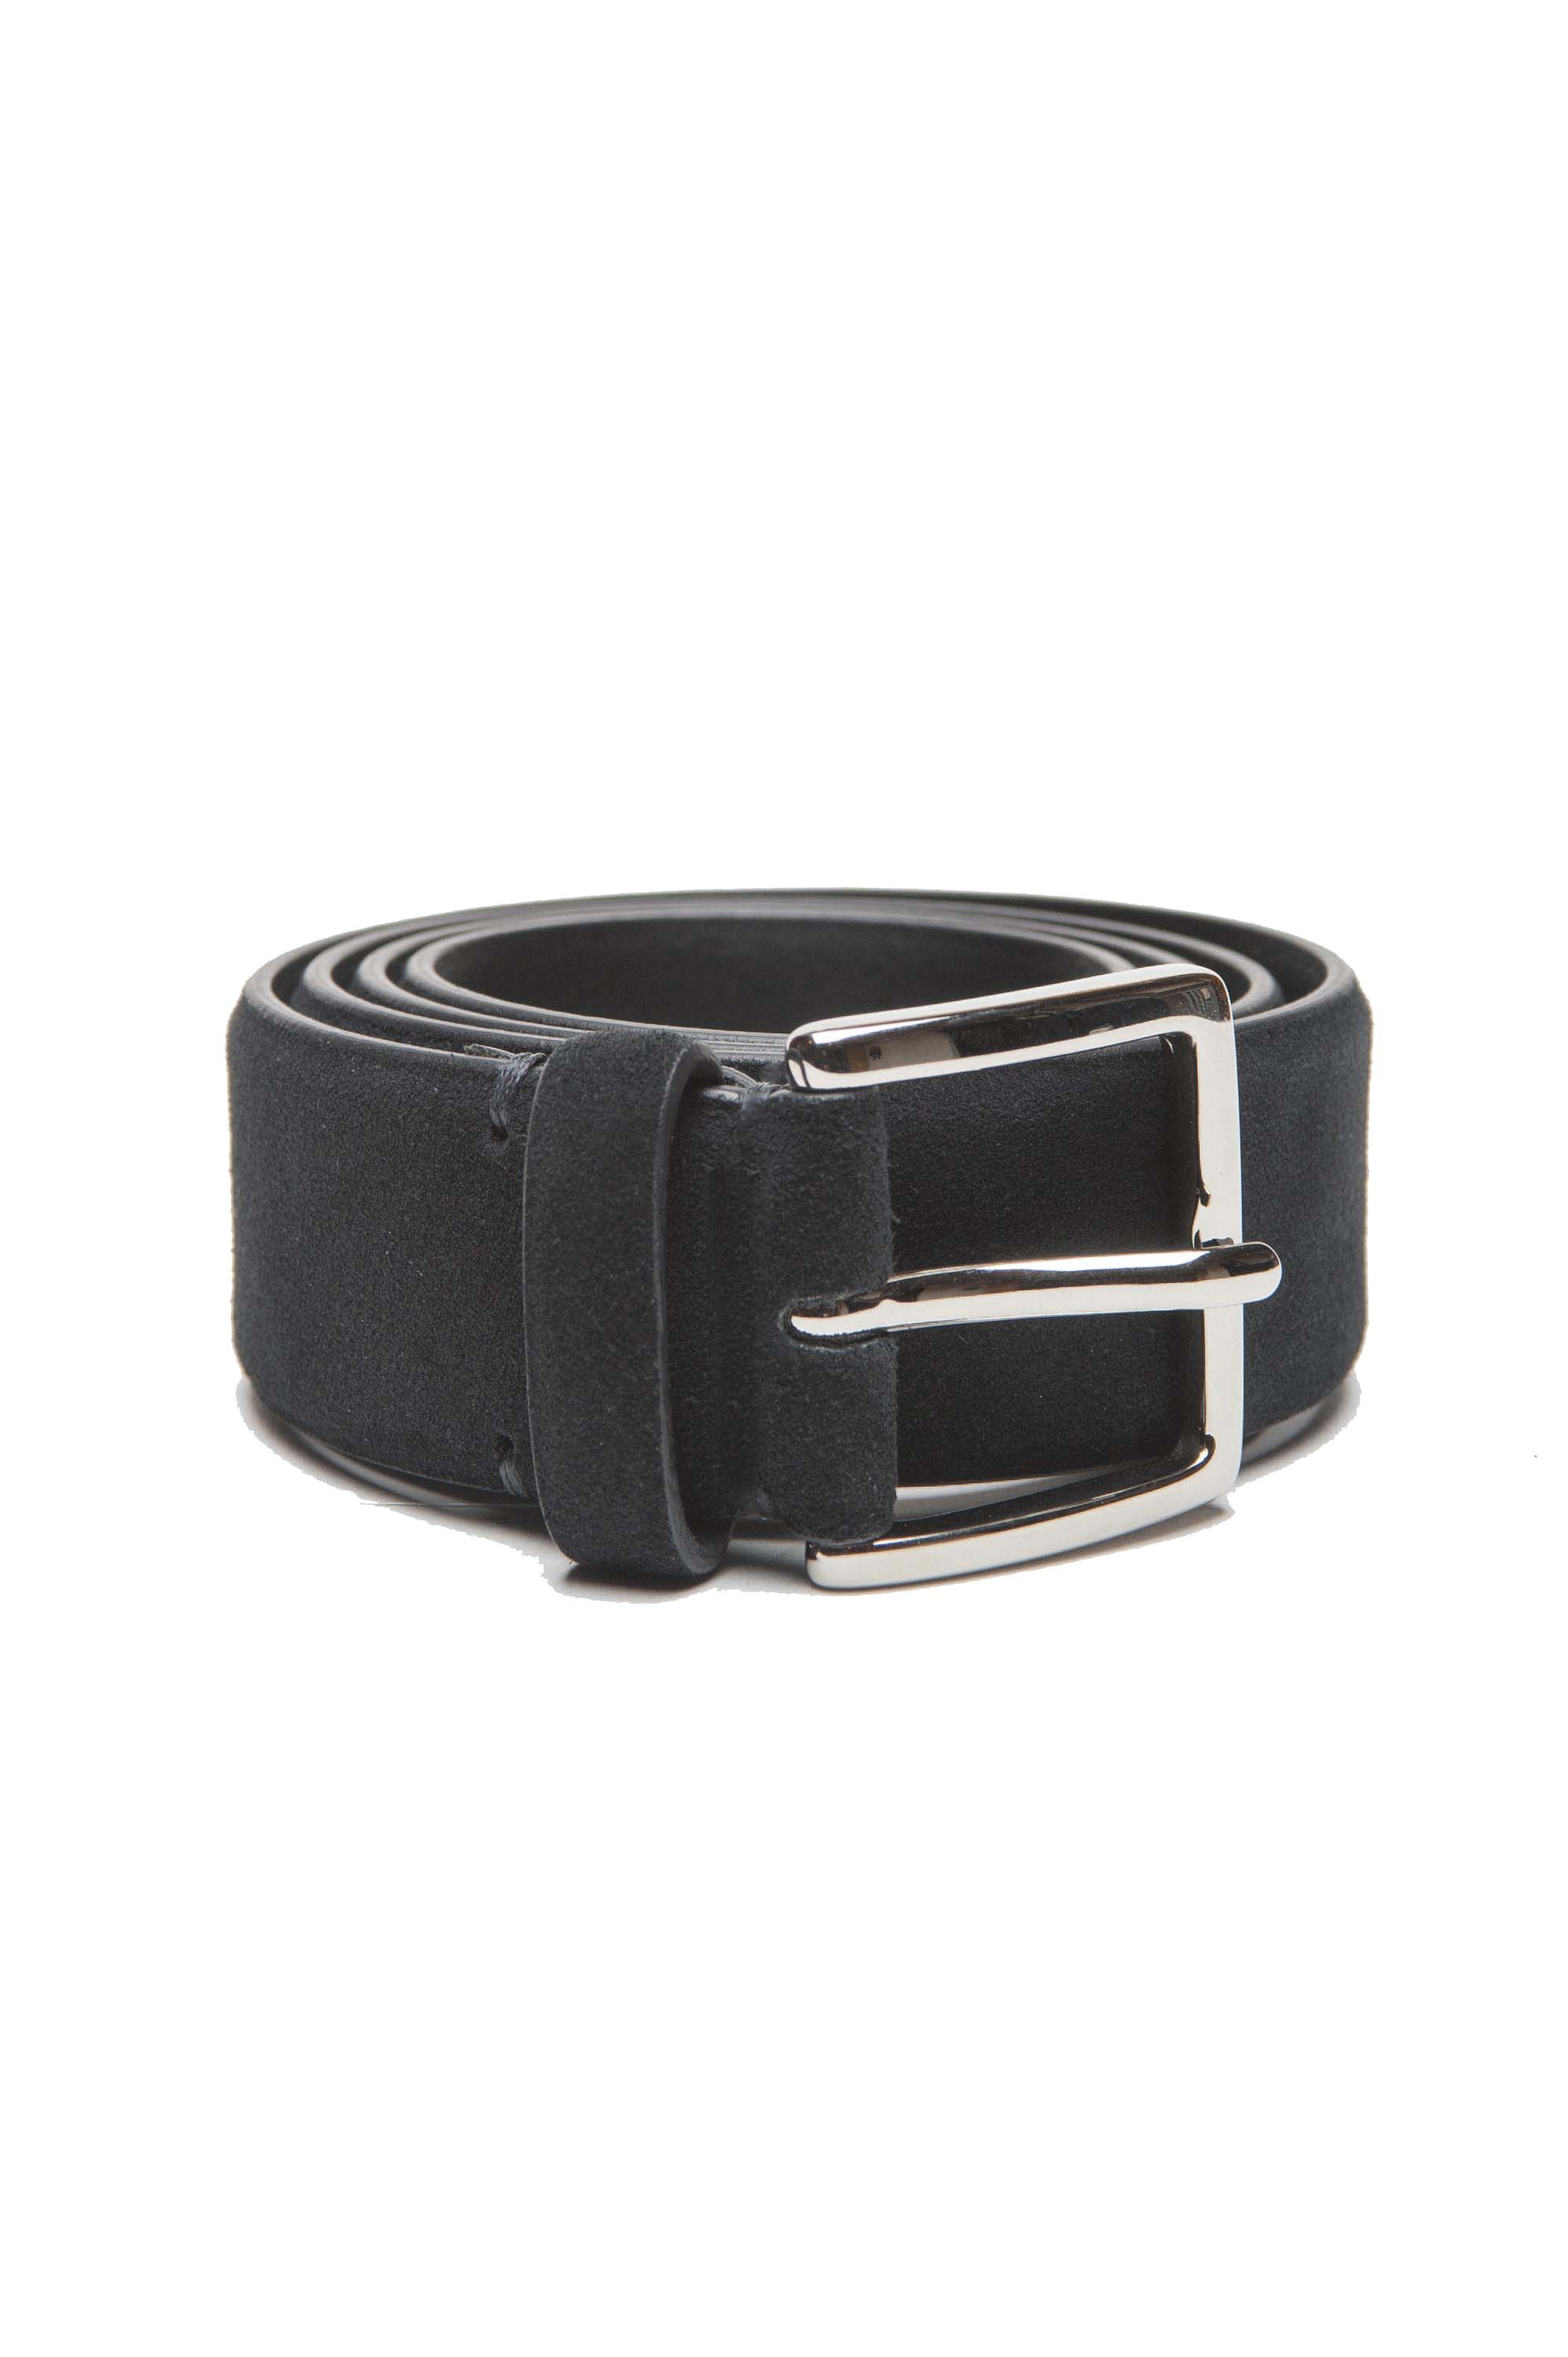 SBU 01243_19AW Classic belt in blue suede leather 1.4 inches 01